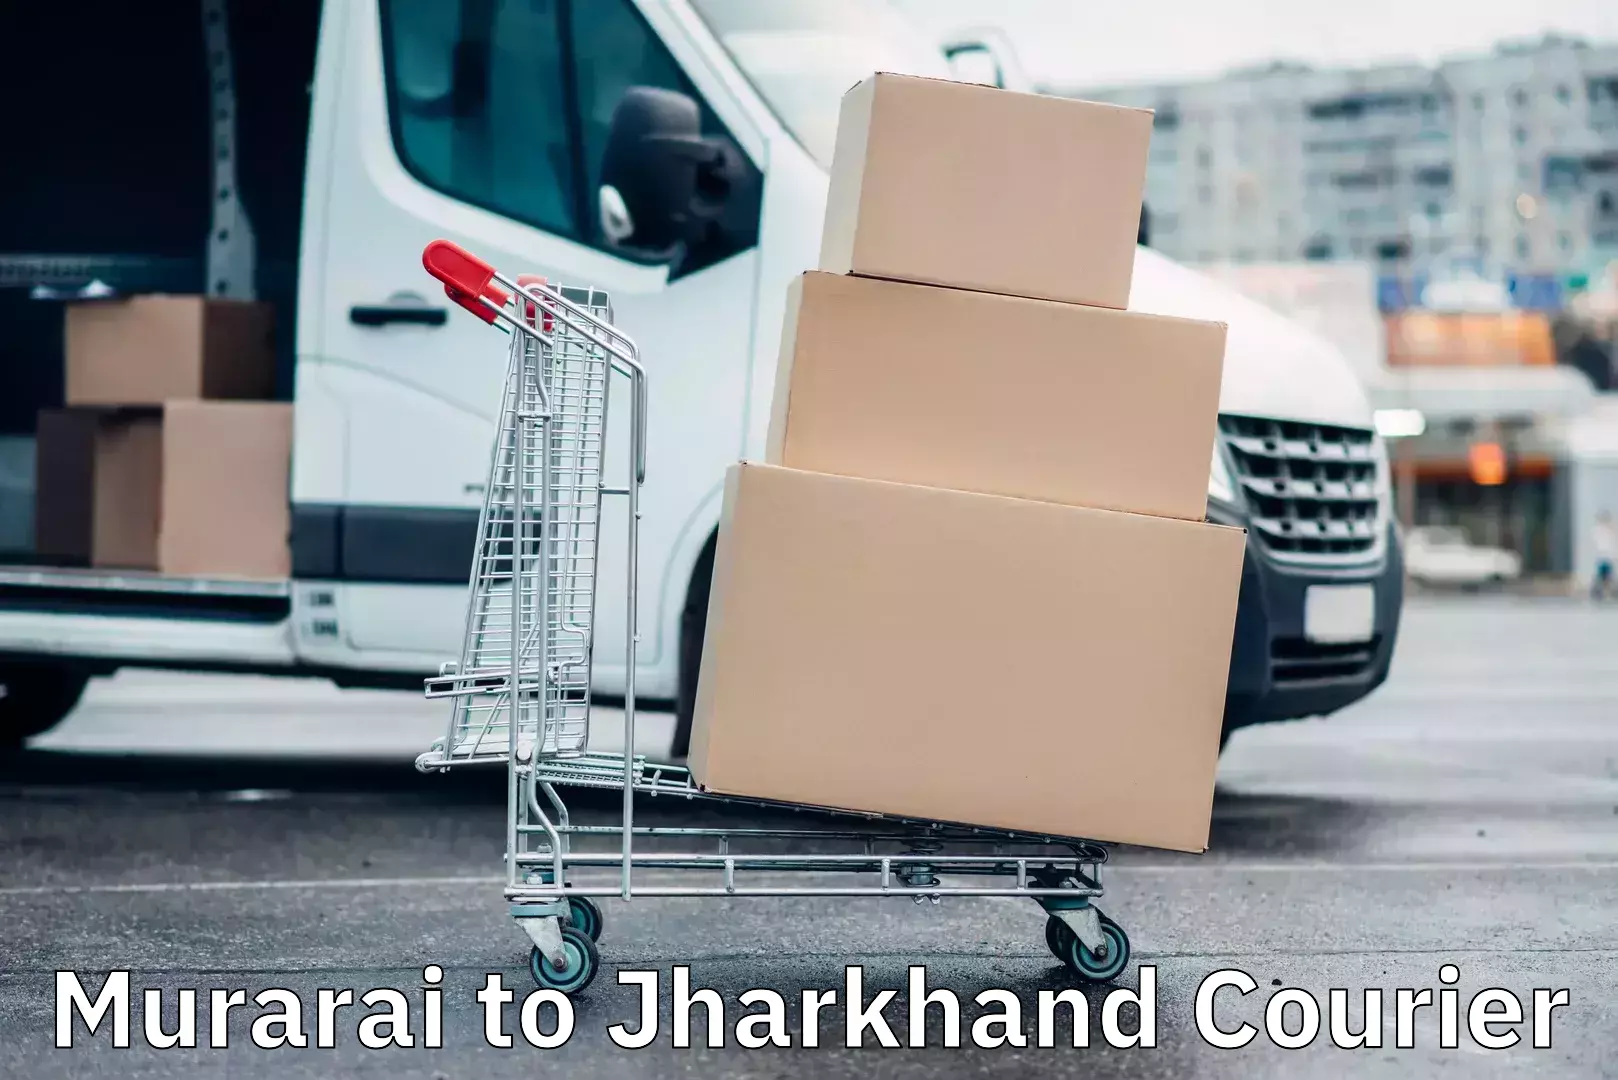 Express delivery network Murarai to Jharkhand